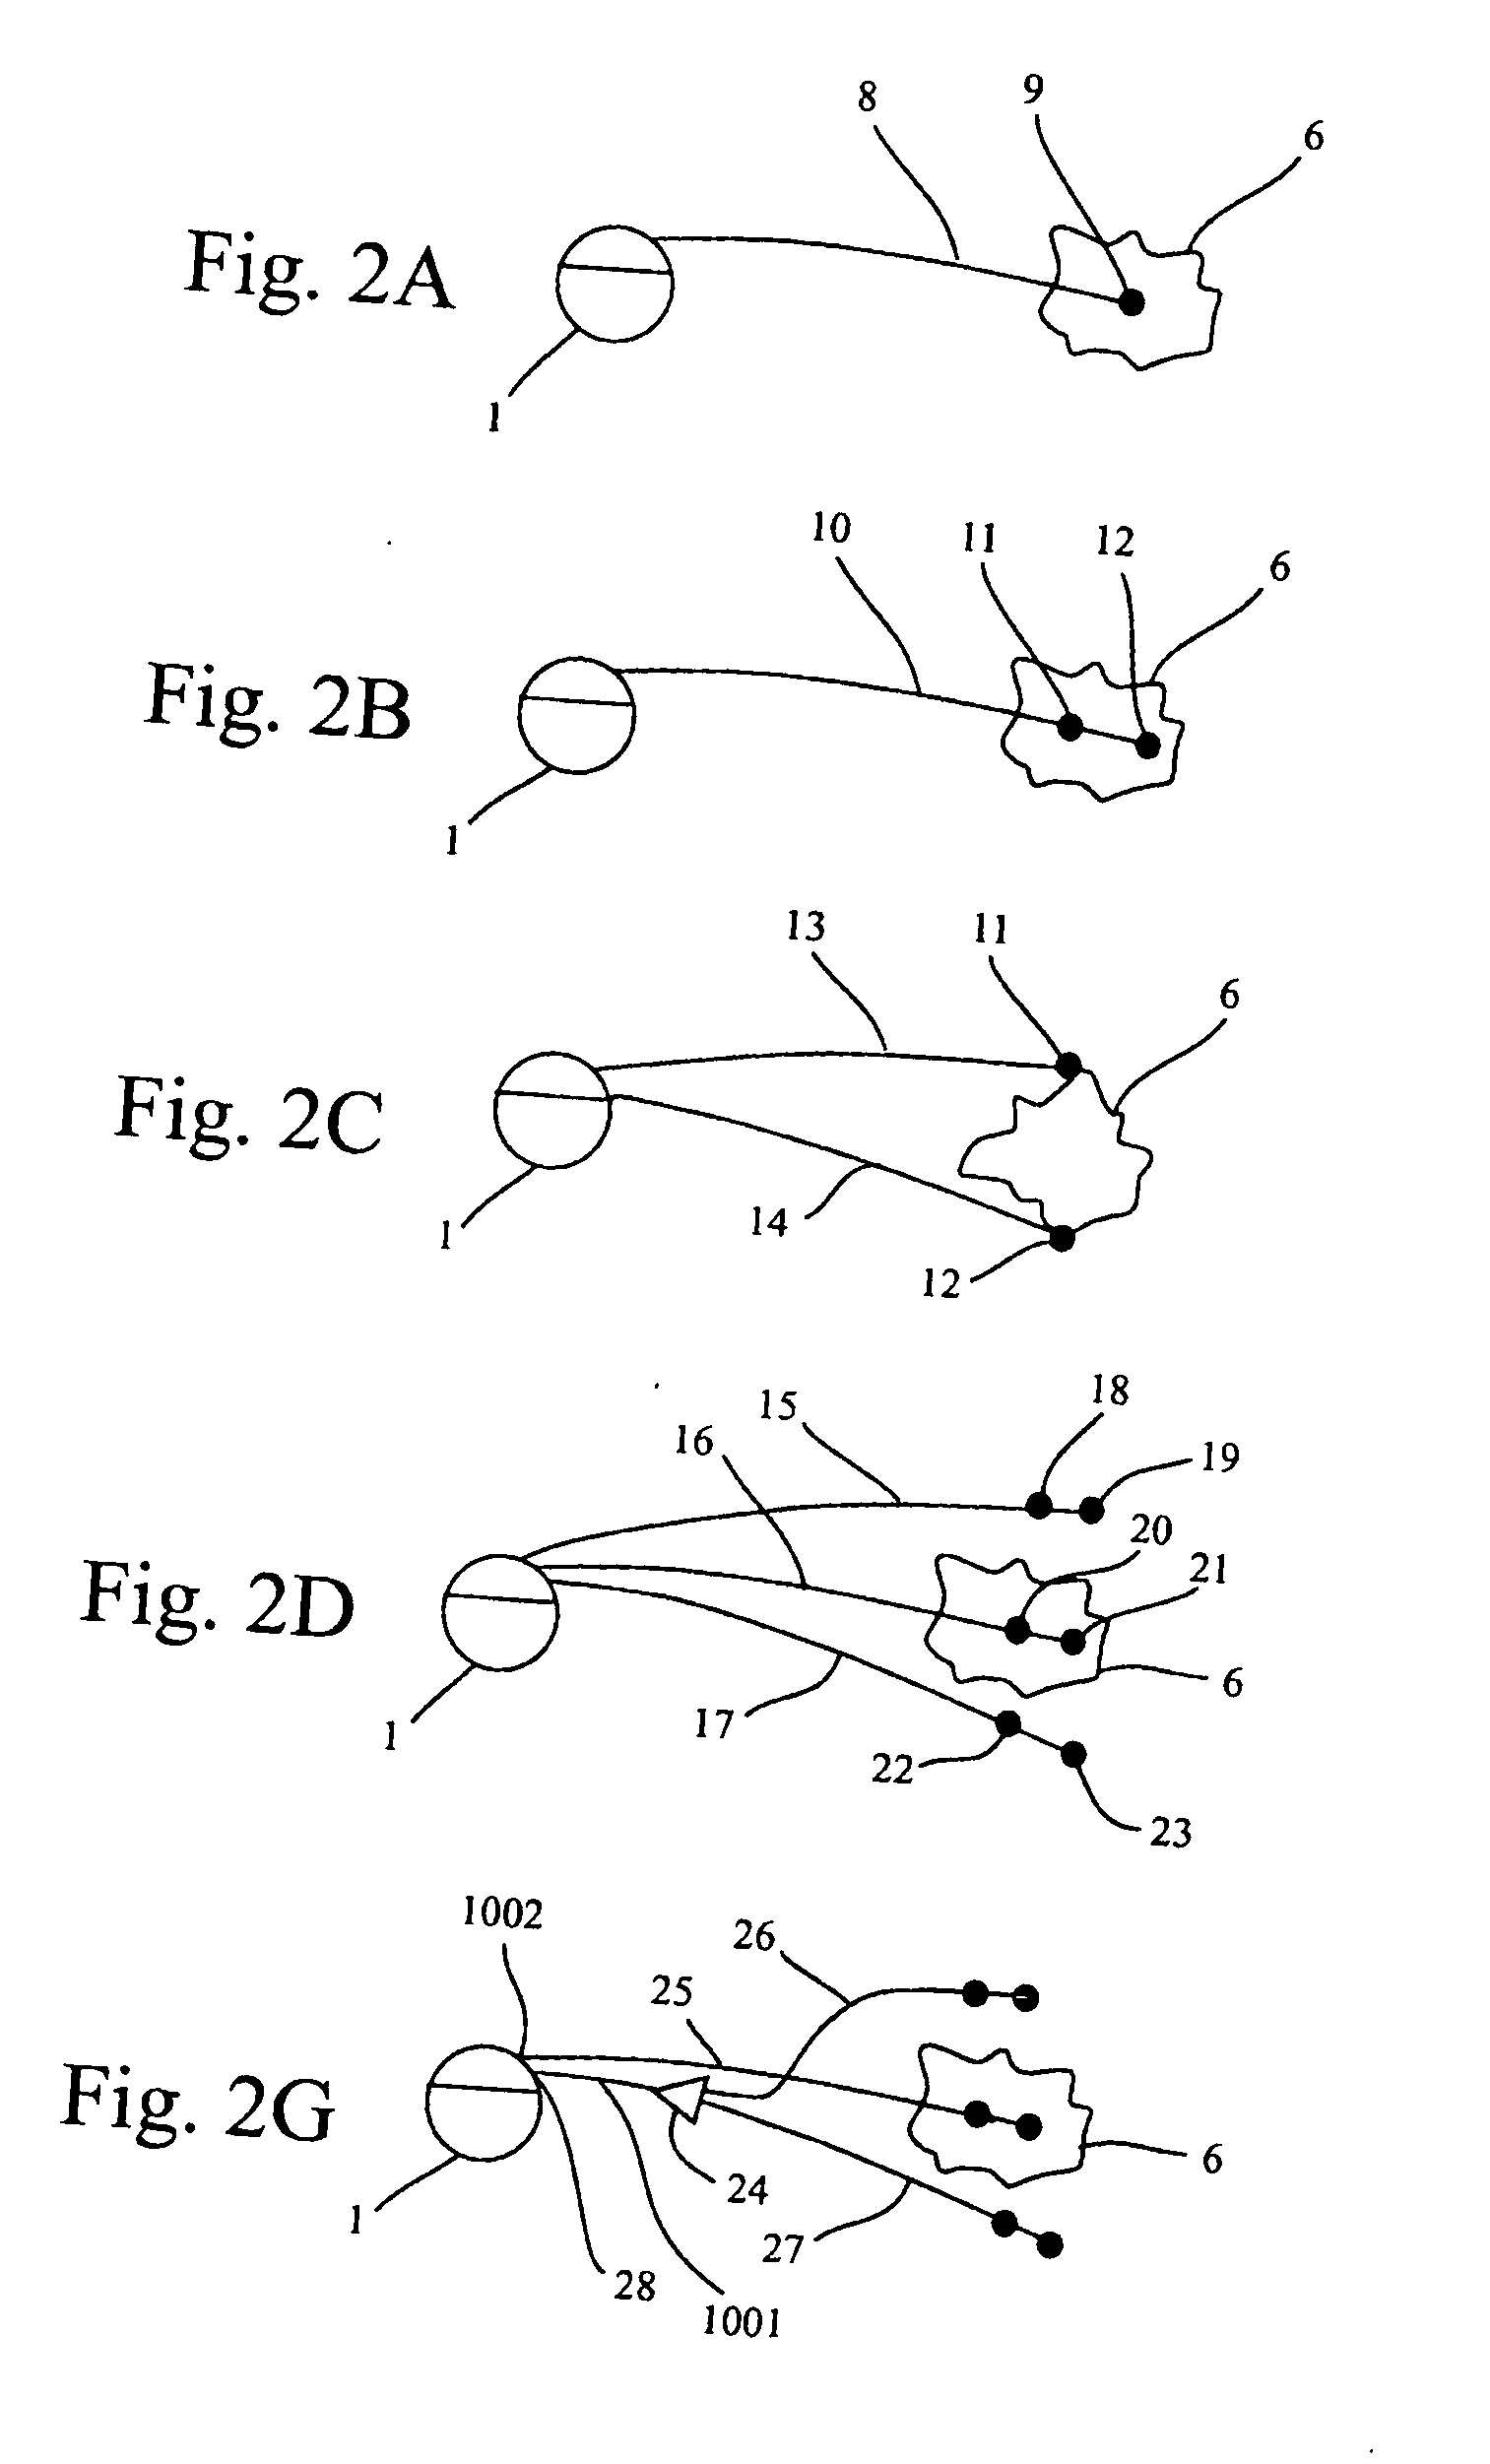 Method and Device for Treating Abnormal Tissue Growth With Electrical Therapy